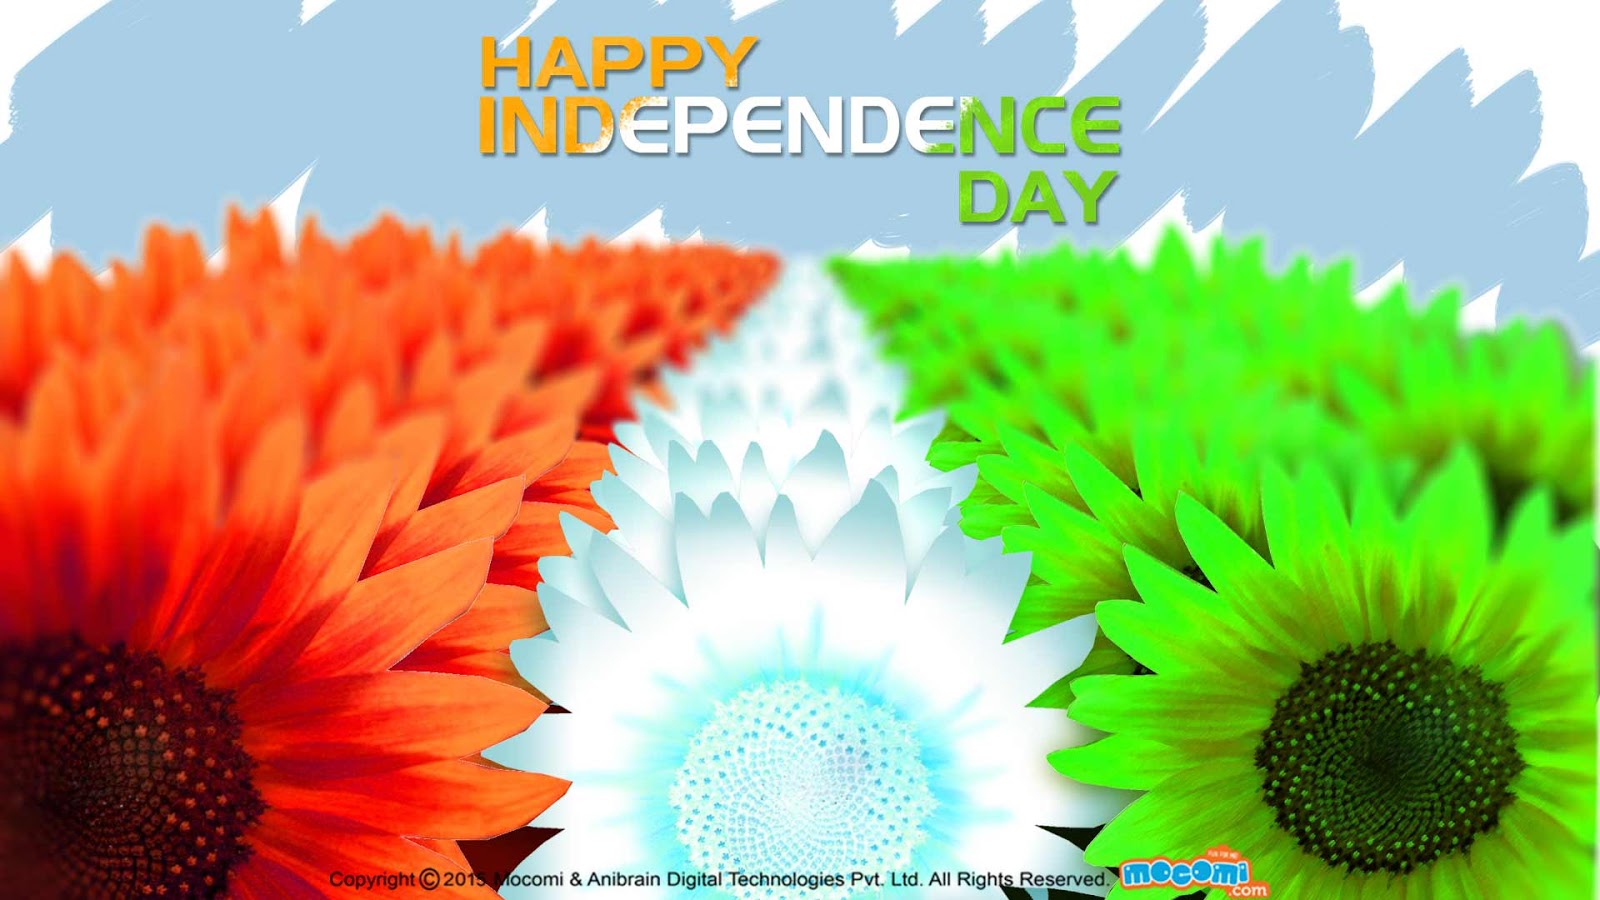 Happy Independence Day Hd Wallpapers Images Photos HD Wallpapers Download Free Images Wallpaper [wallpaper981.blogspot.com]